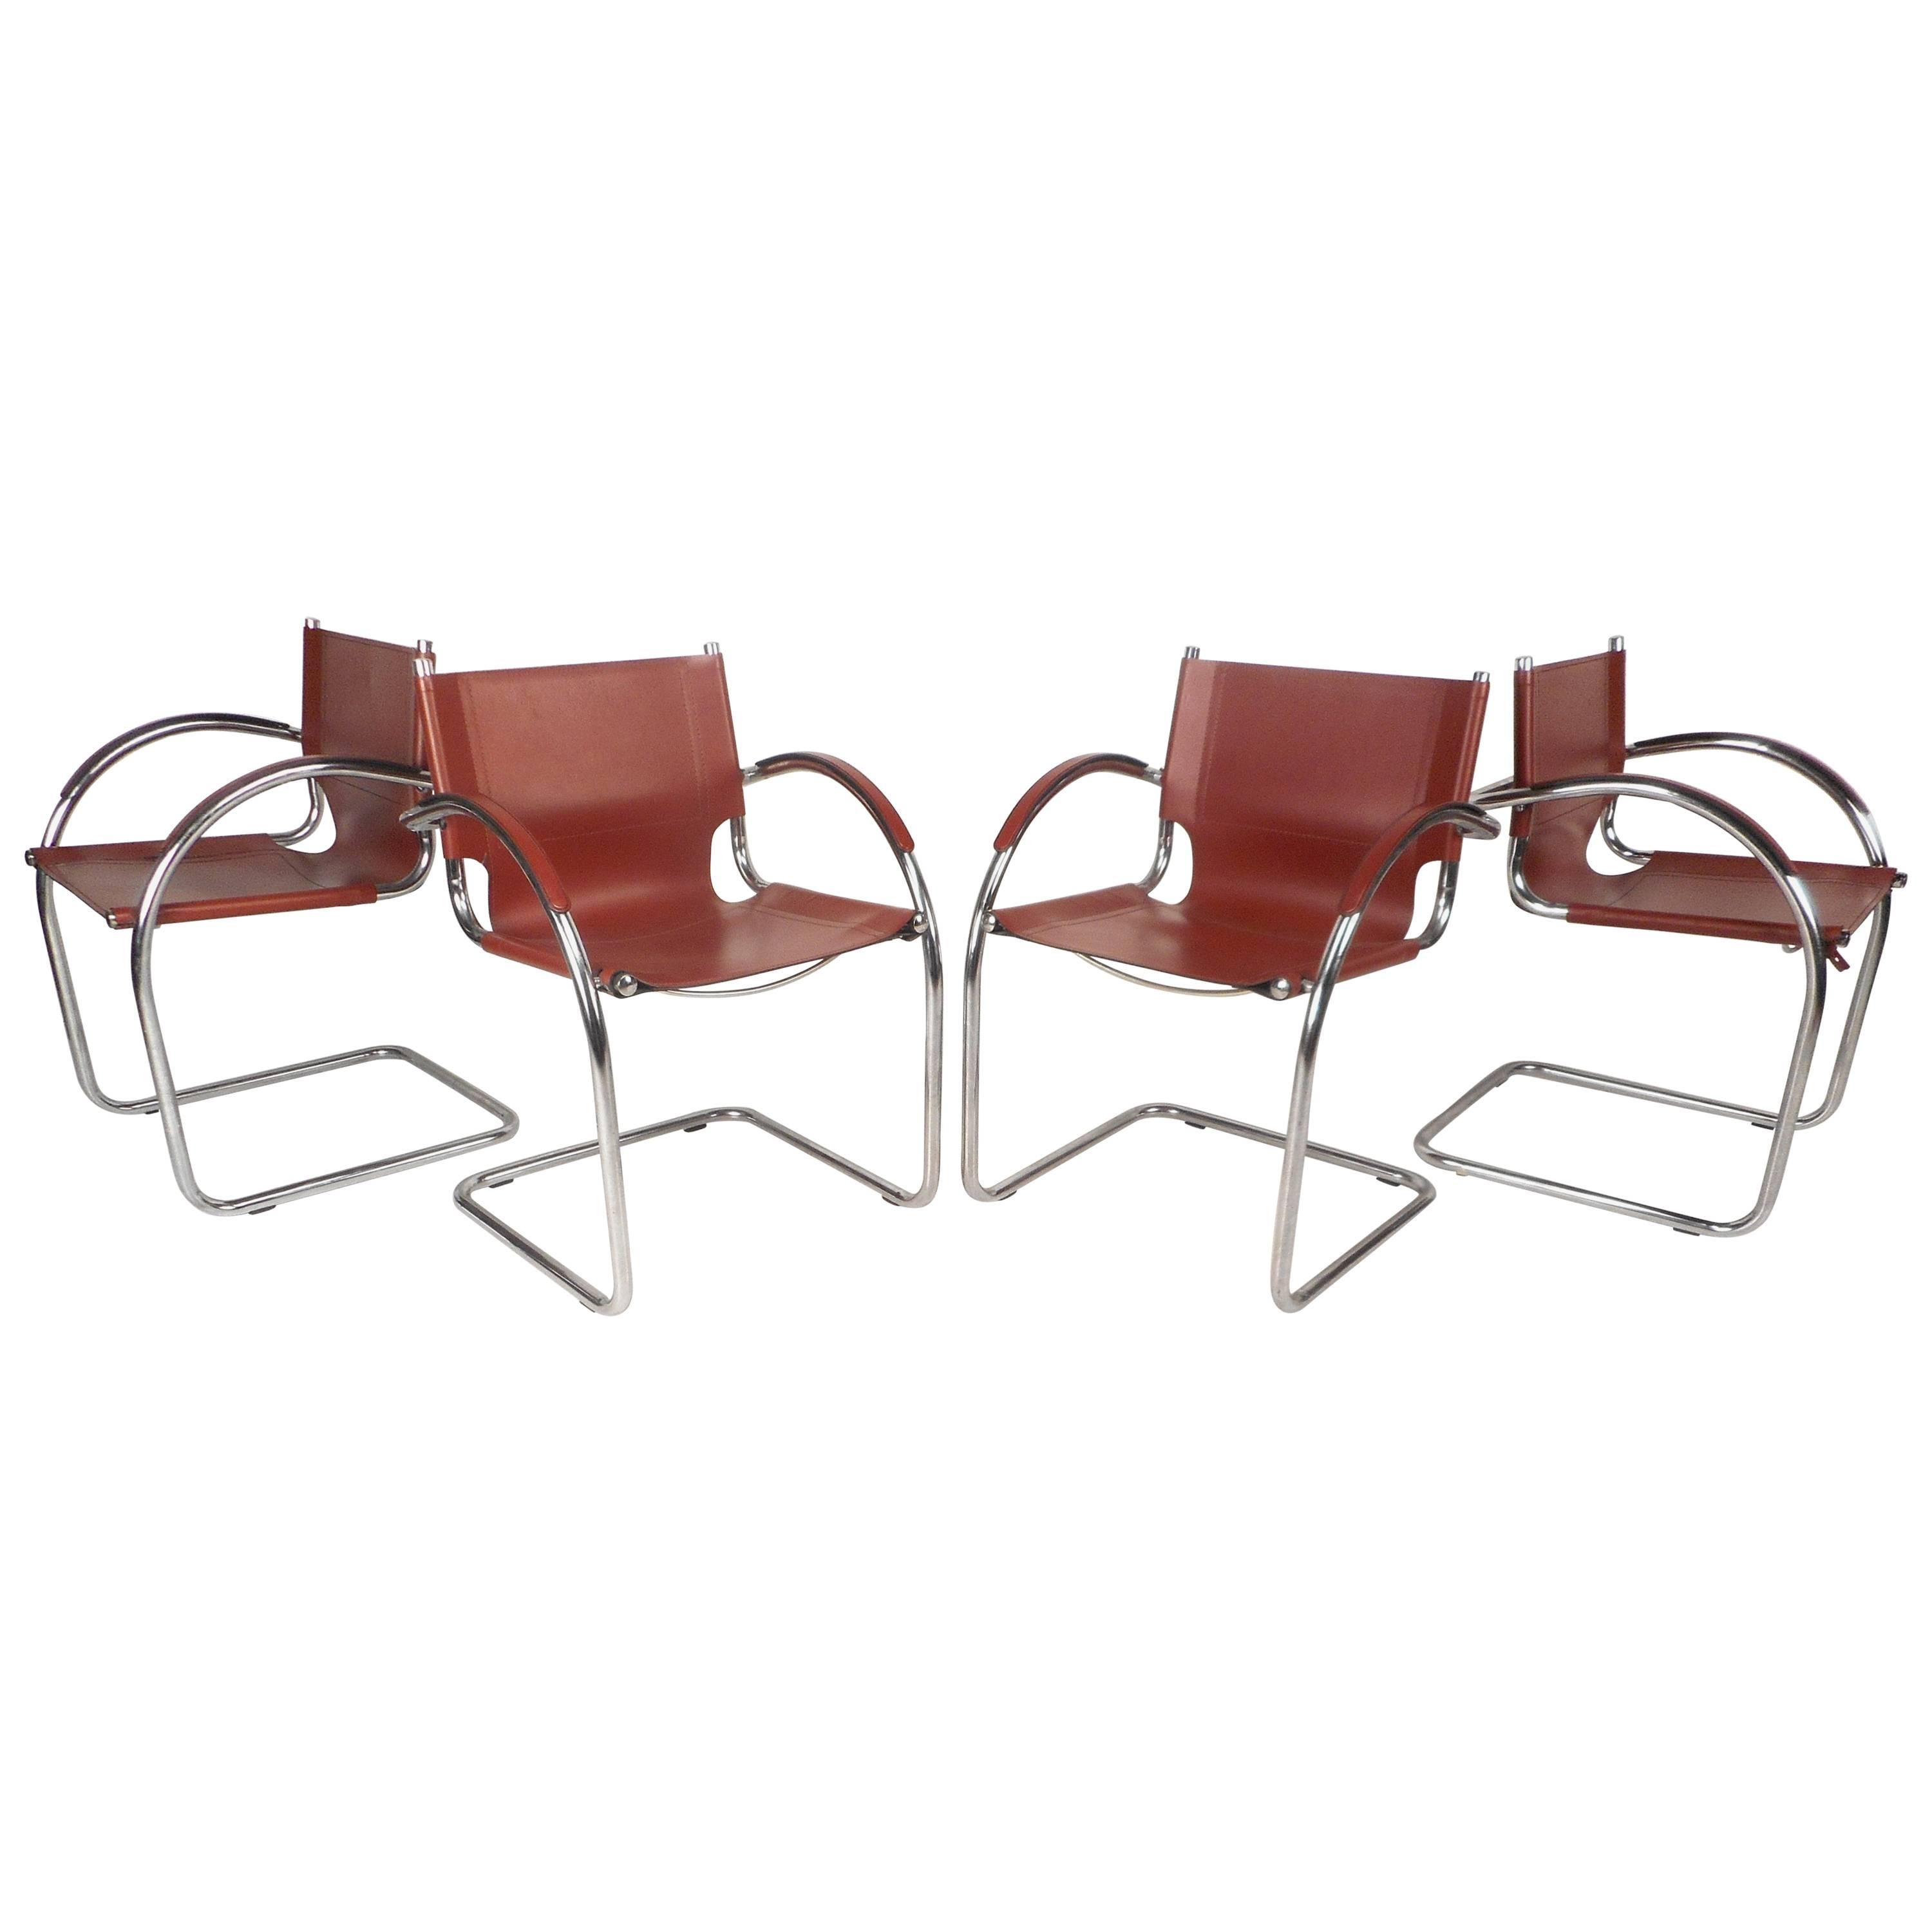 Set of Unique Mid-Century Modern Leather and Chrome Cantilever Dining Chairs